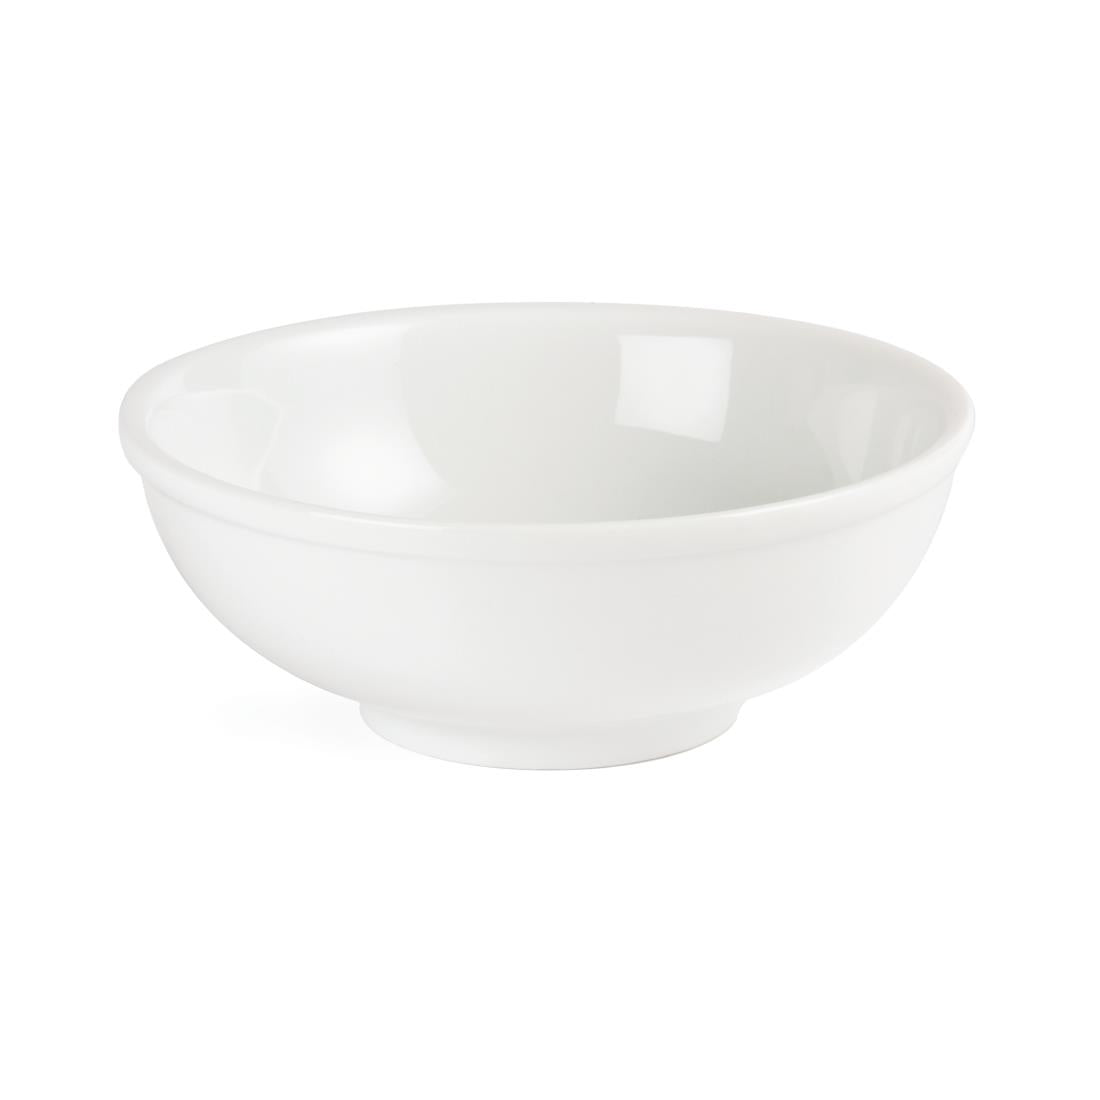 C329 Olympia Whiteware Noodle Bowls 190mm (Pack of 6)